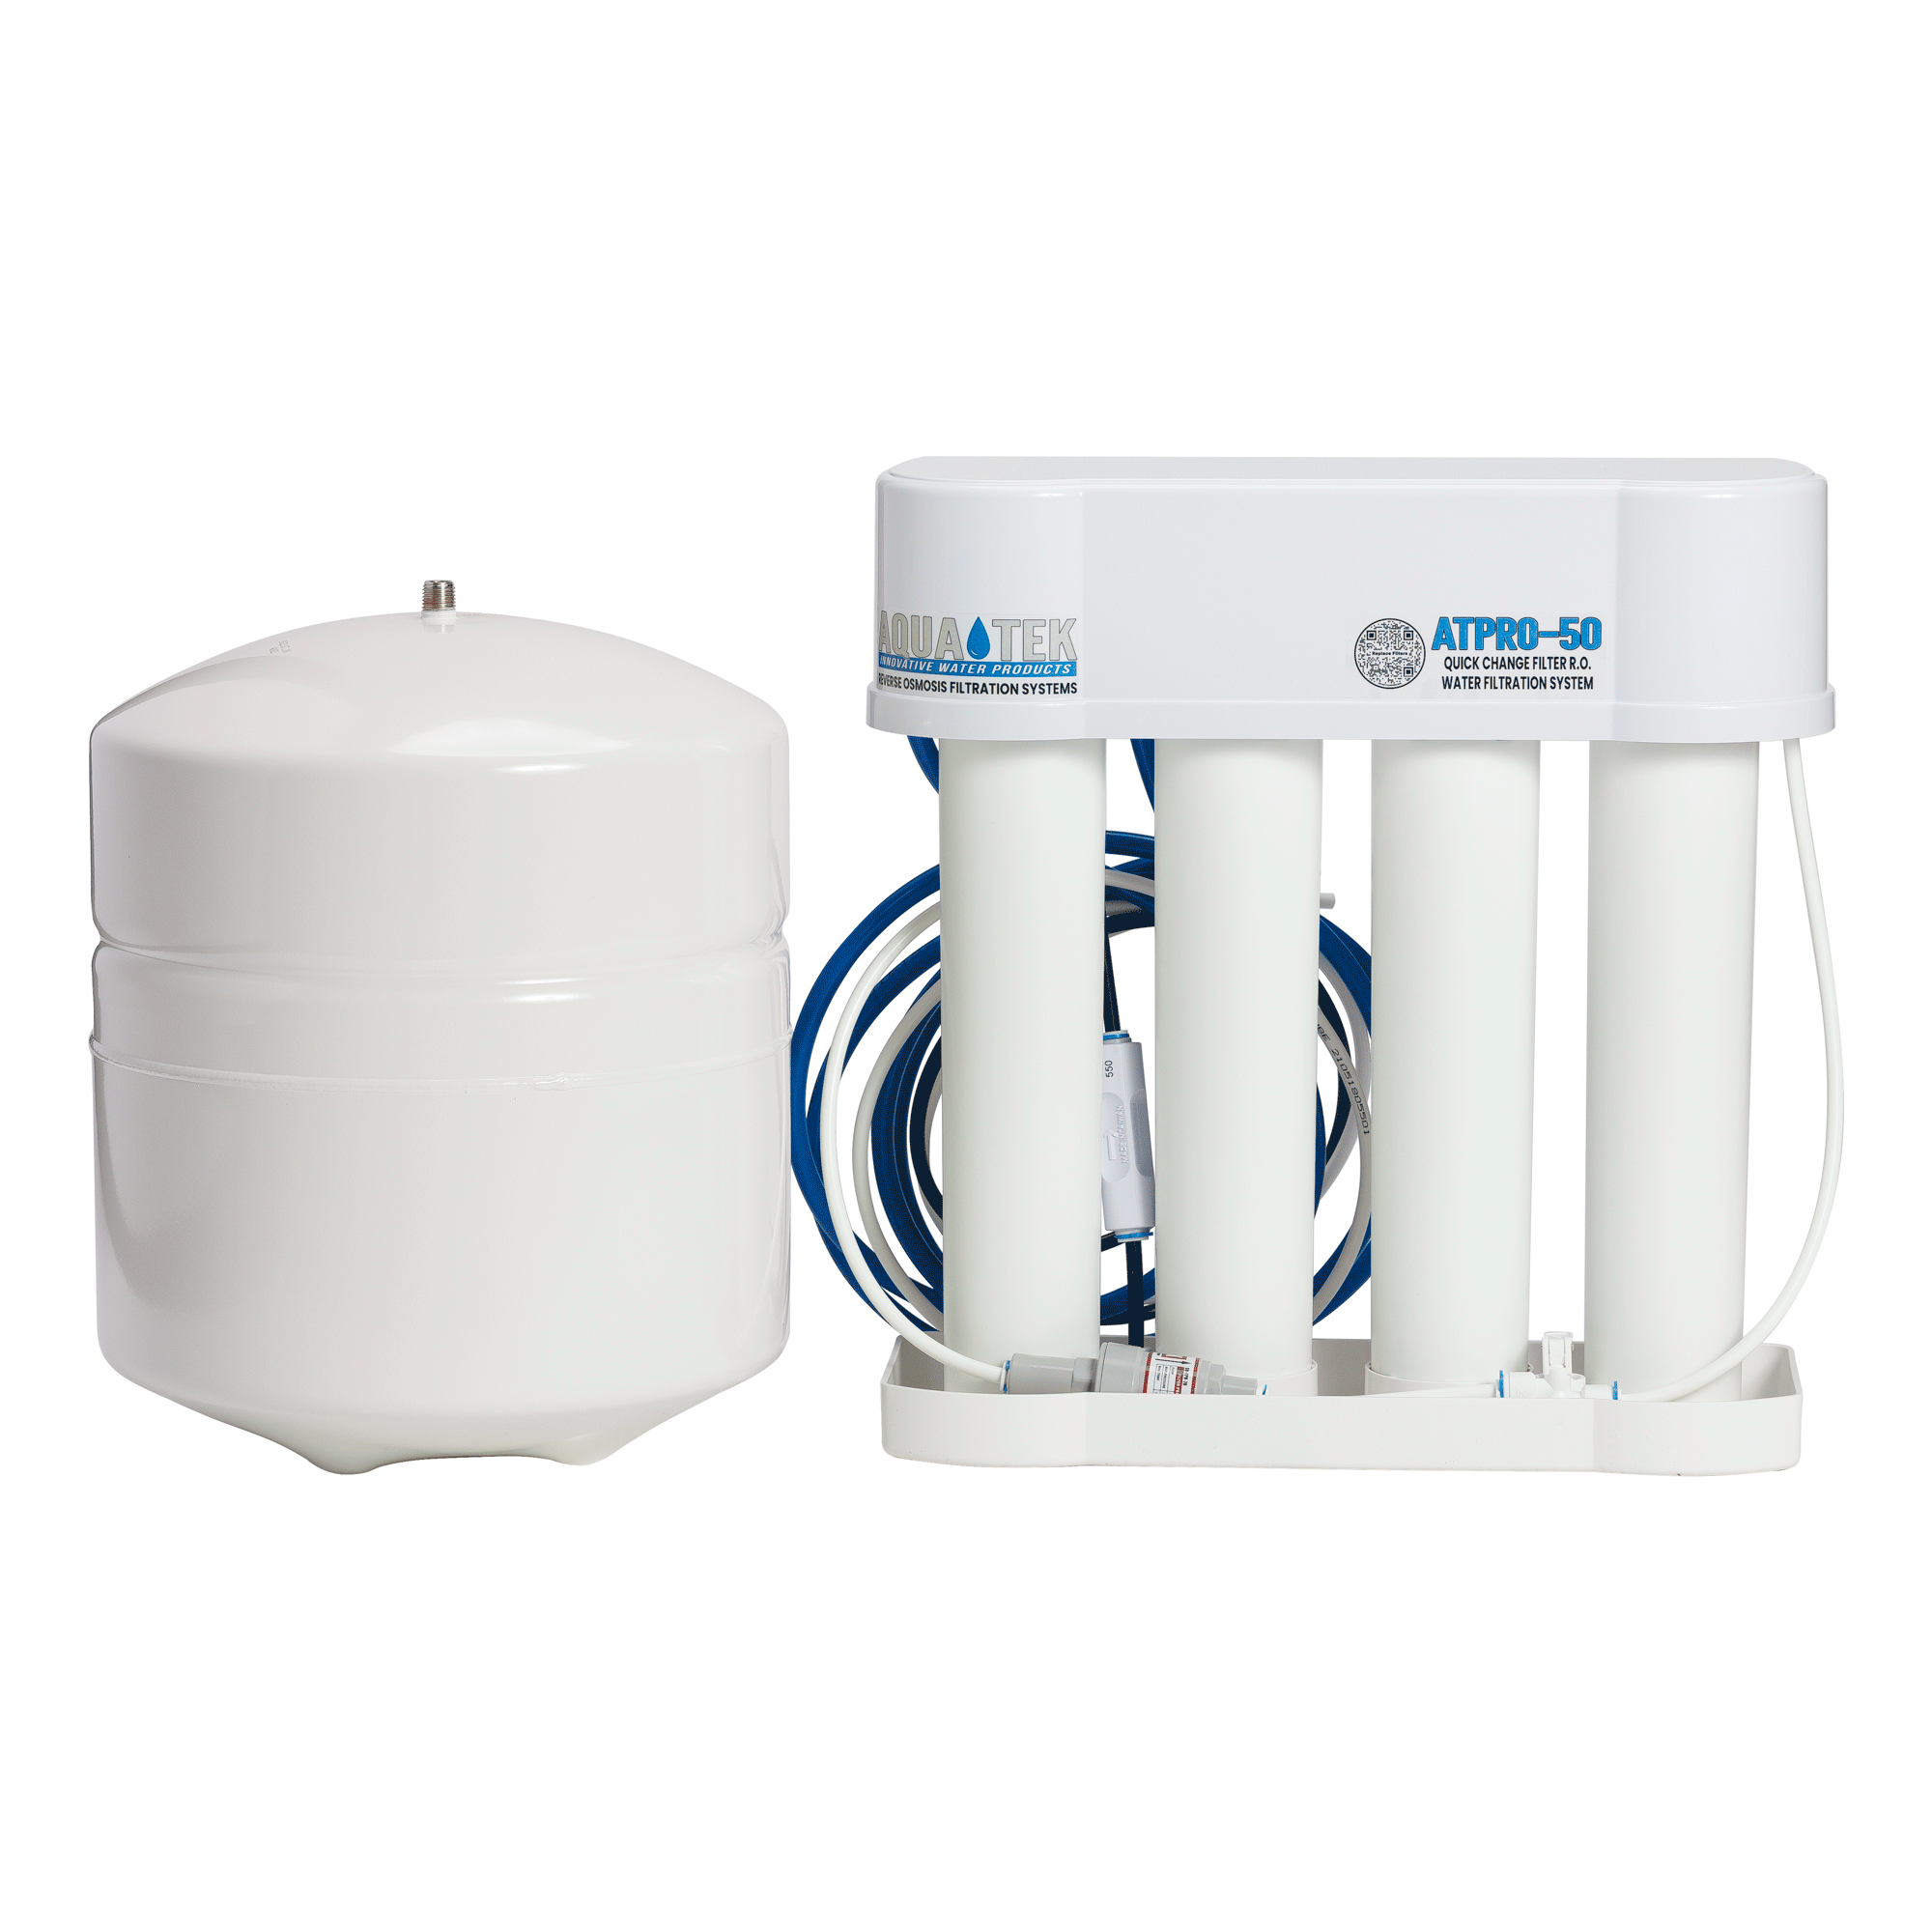 Hague H350 Reverse Osmosis Drinking Water System